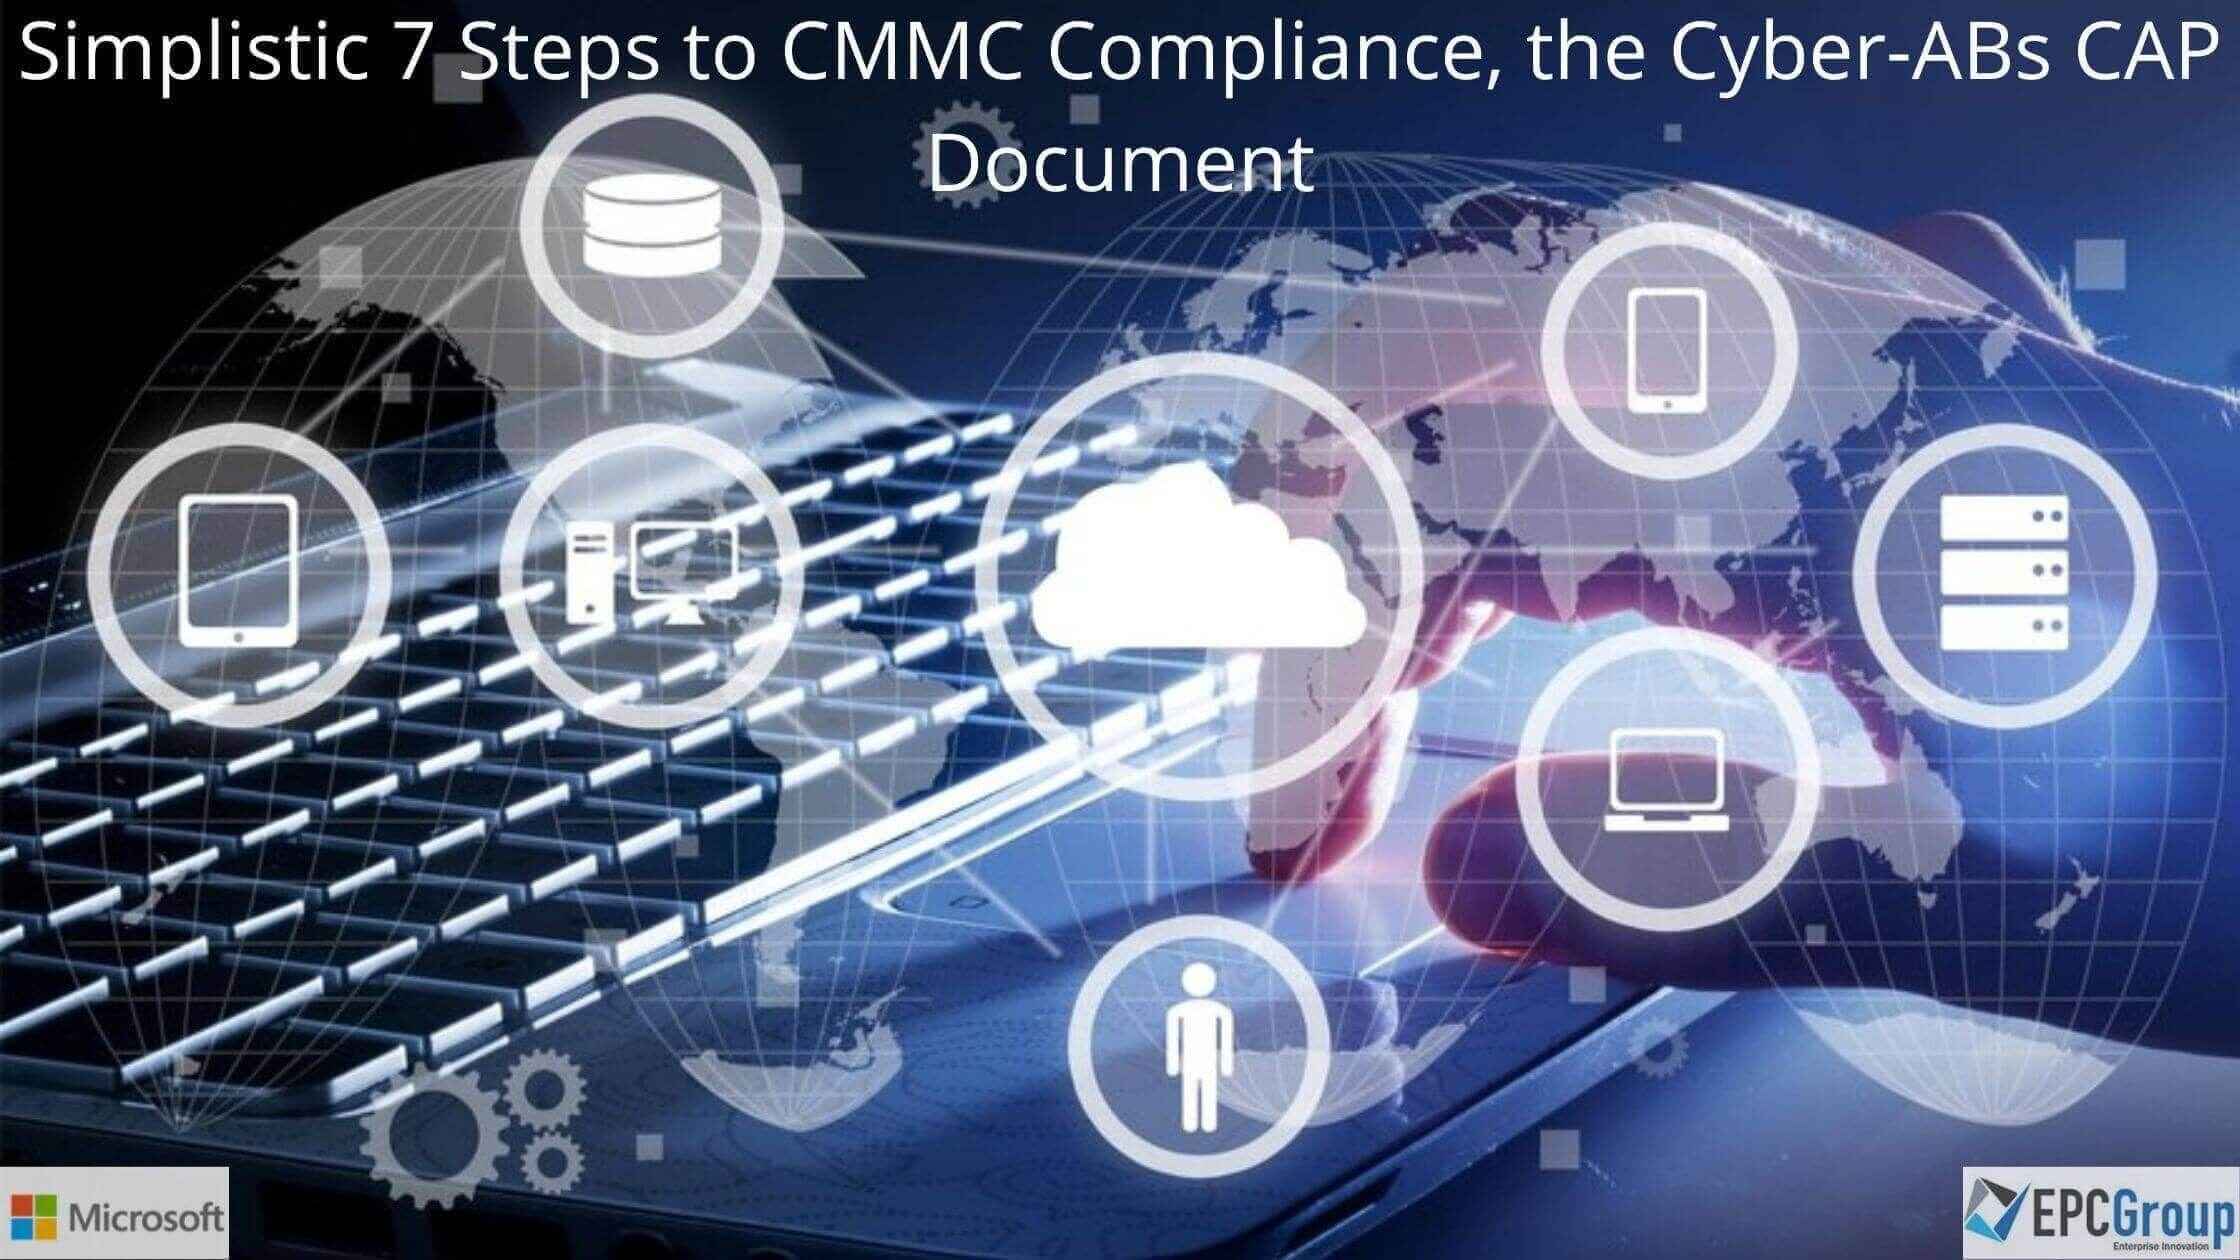 Simplistic 7 Steps to CMMC Compliance, the Cyber-ABs CAP Document - thumb image